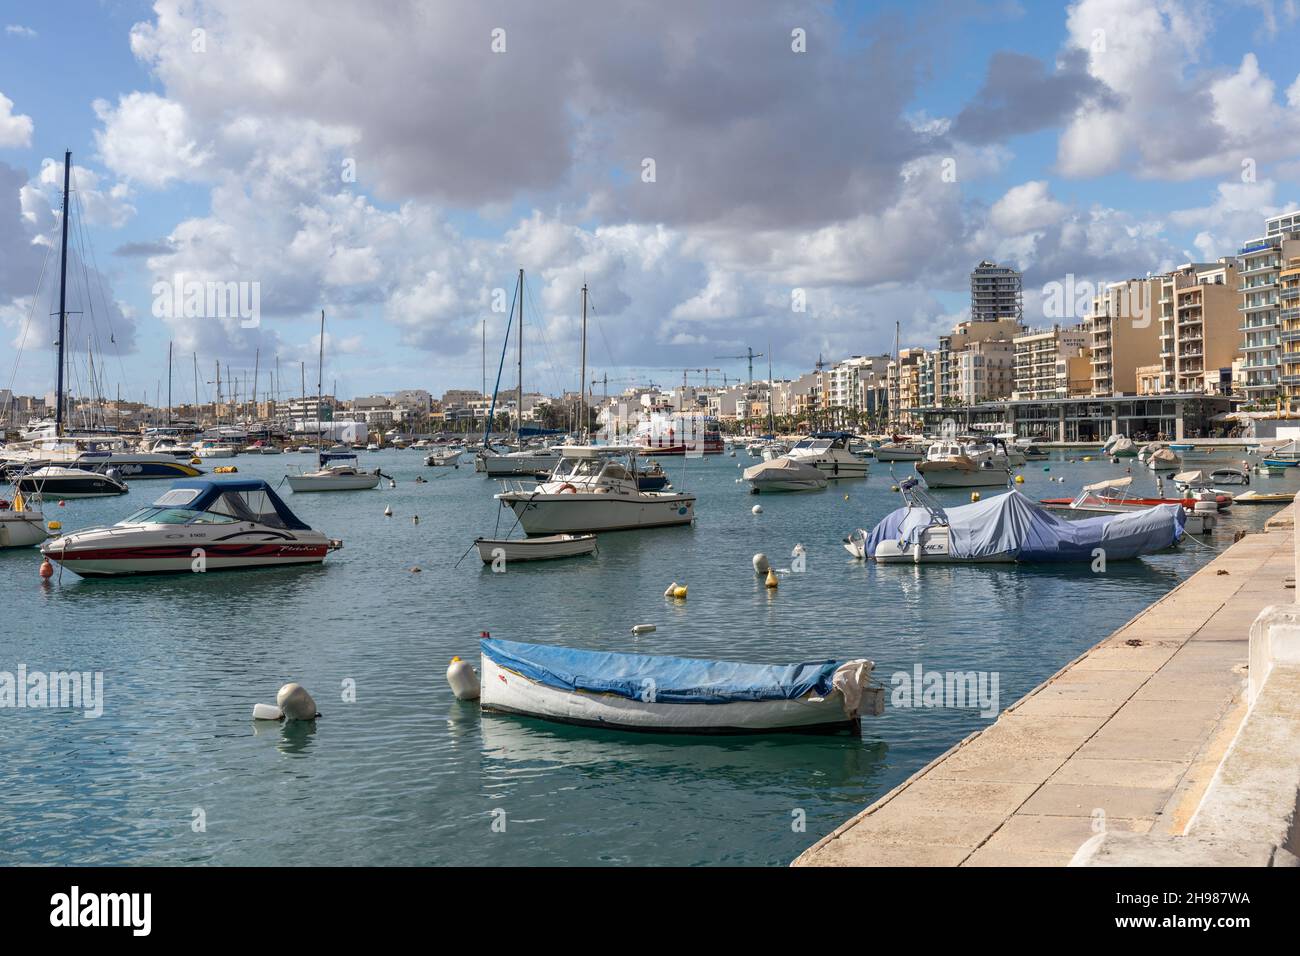 Sliema harbour lined with hotels, Malta, Europe Stock Photo